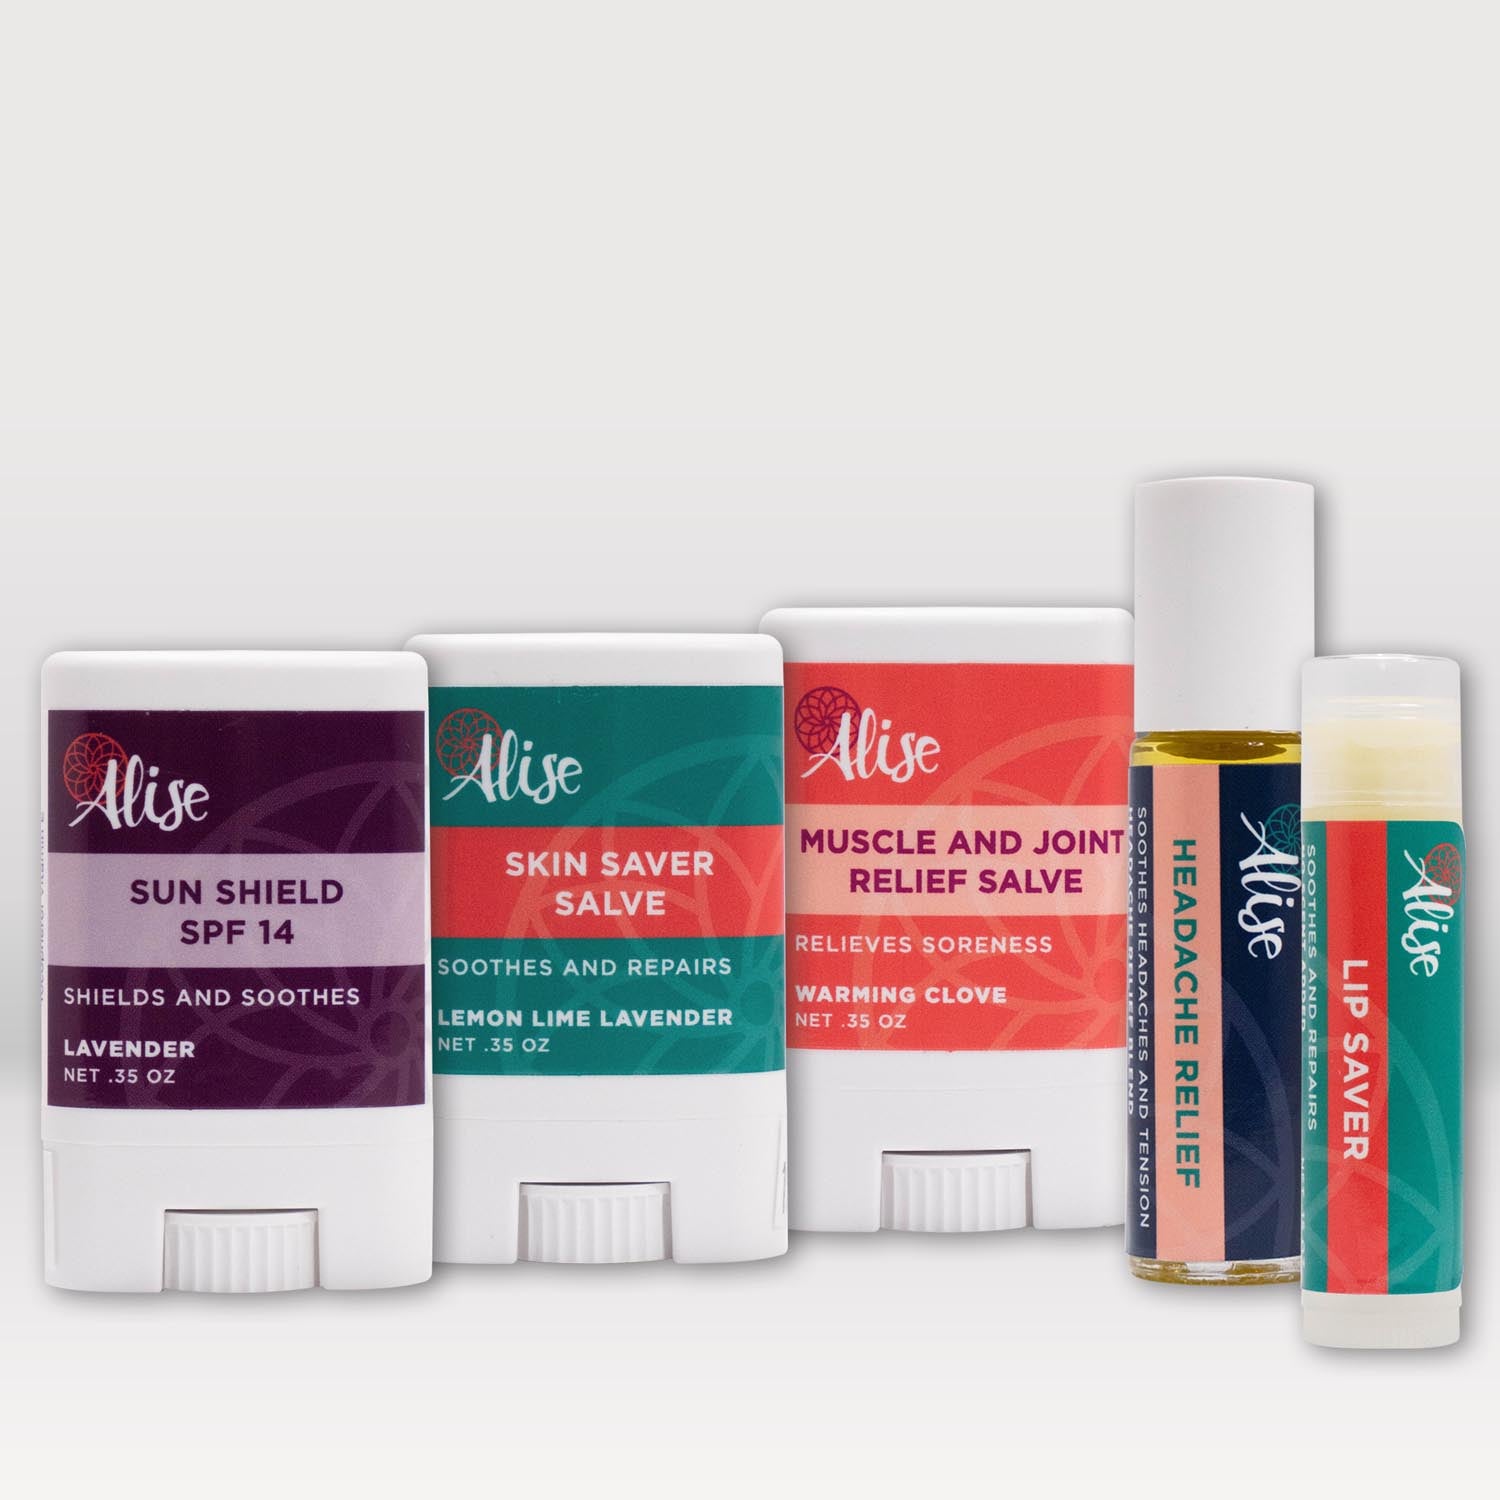 Adventurer's Kit handcrafted by Alise Body Care